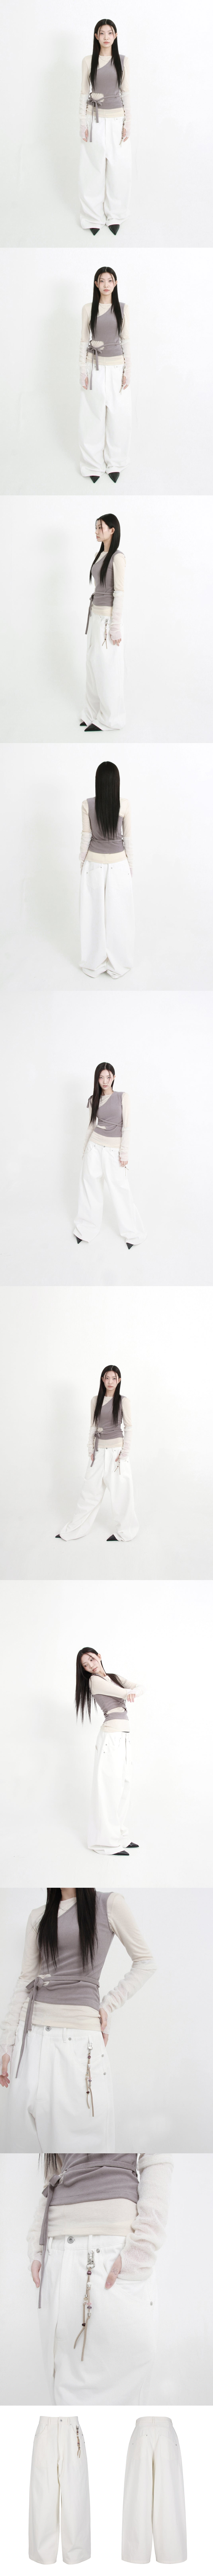 WIDE DOUBLE POCKET PANTS (WHITE)